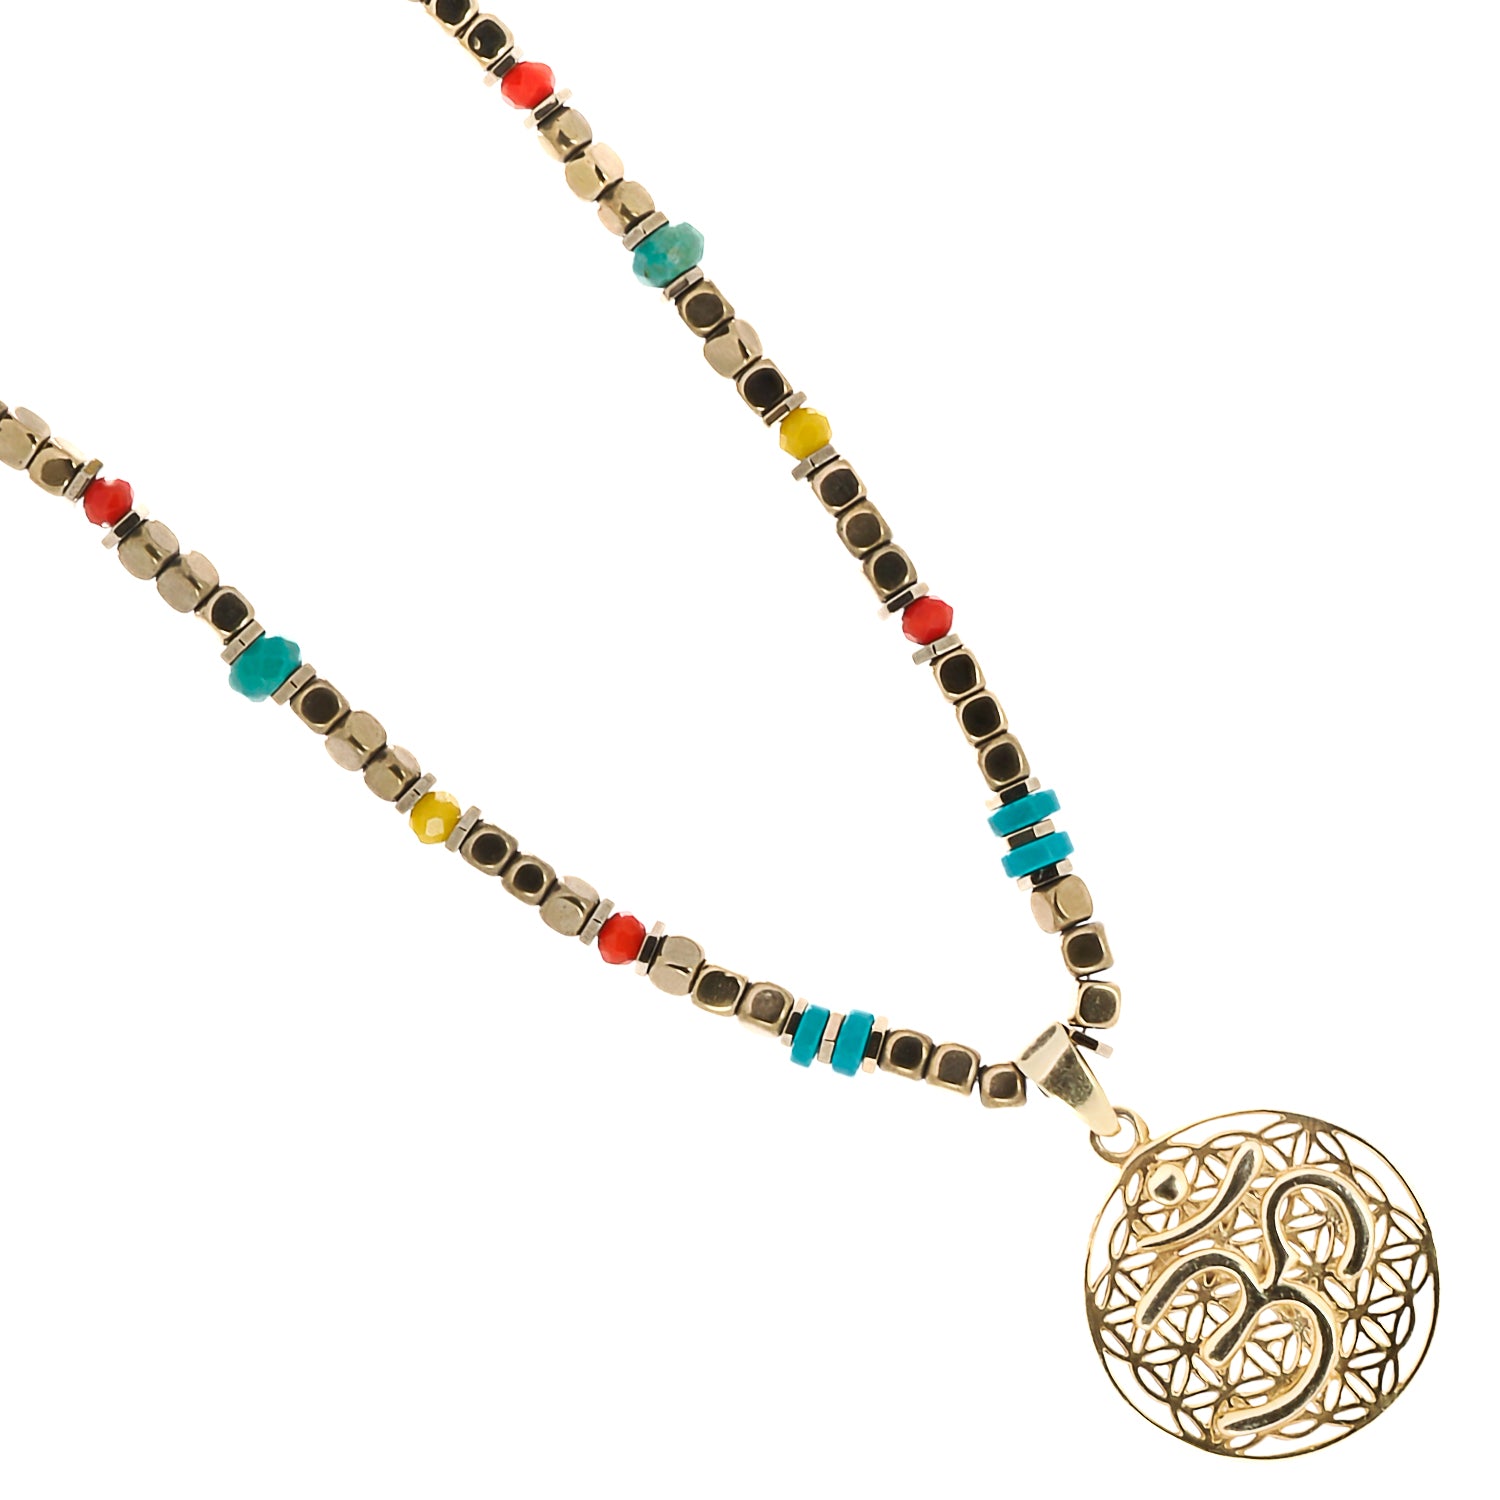 Turquoise stone beads adding a refreshing pop of color to the Breathe Om Gold Necklace, promoting calmness and balance.